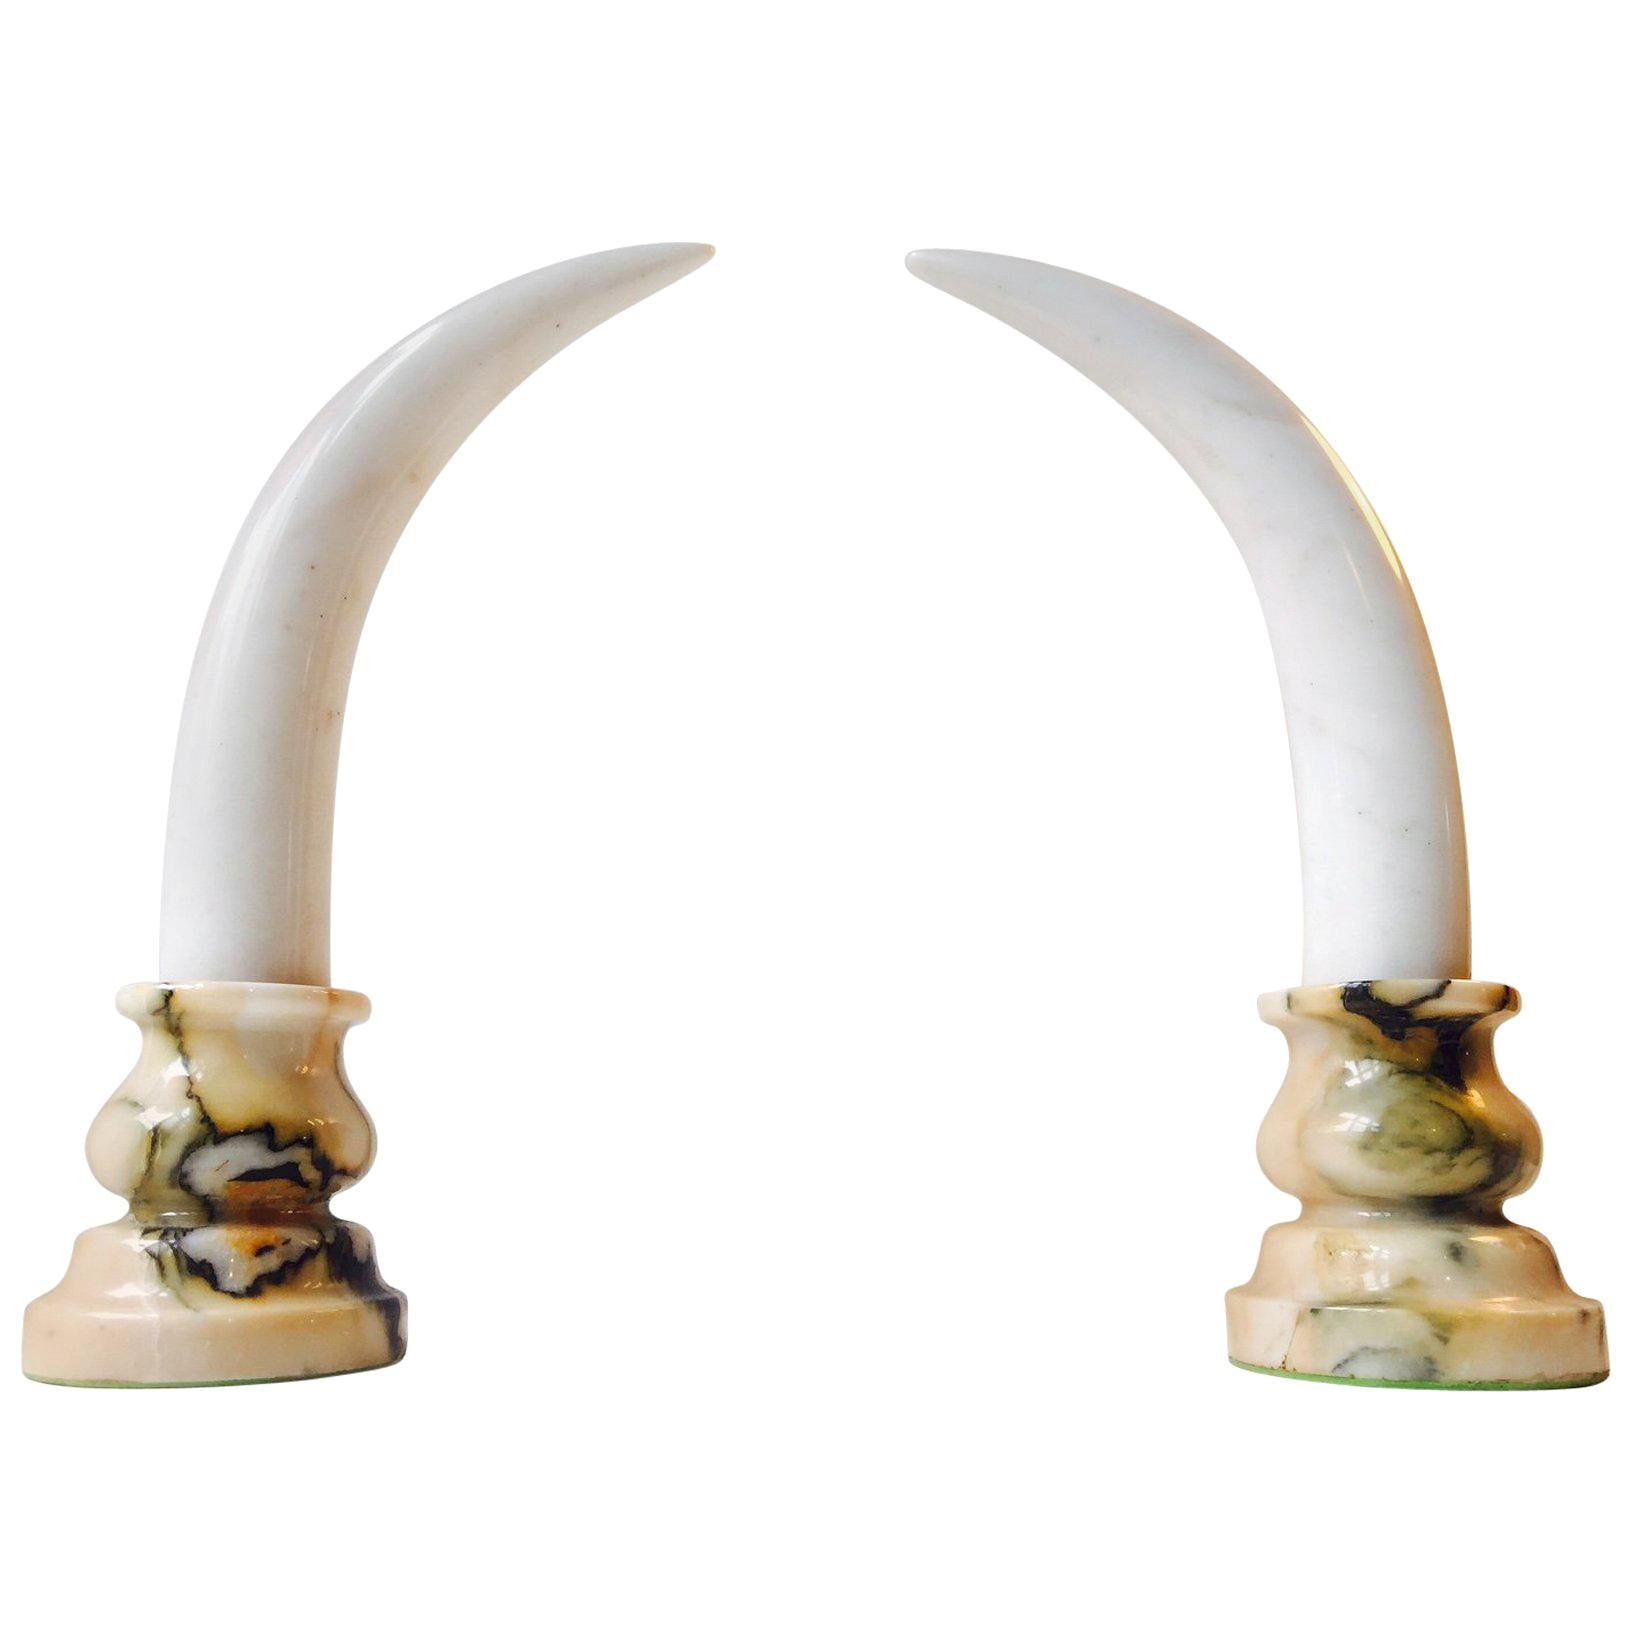 Pair of Faux 'Elephant Tusk', Marble Bookends or Dresser Ornaments, 20th Century For Sale